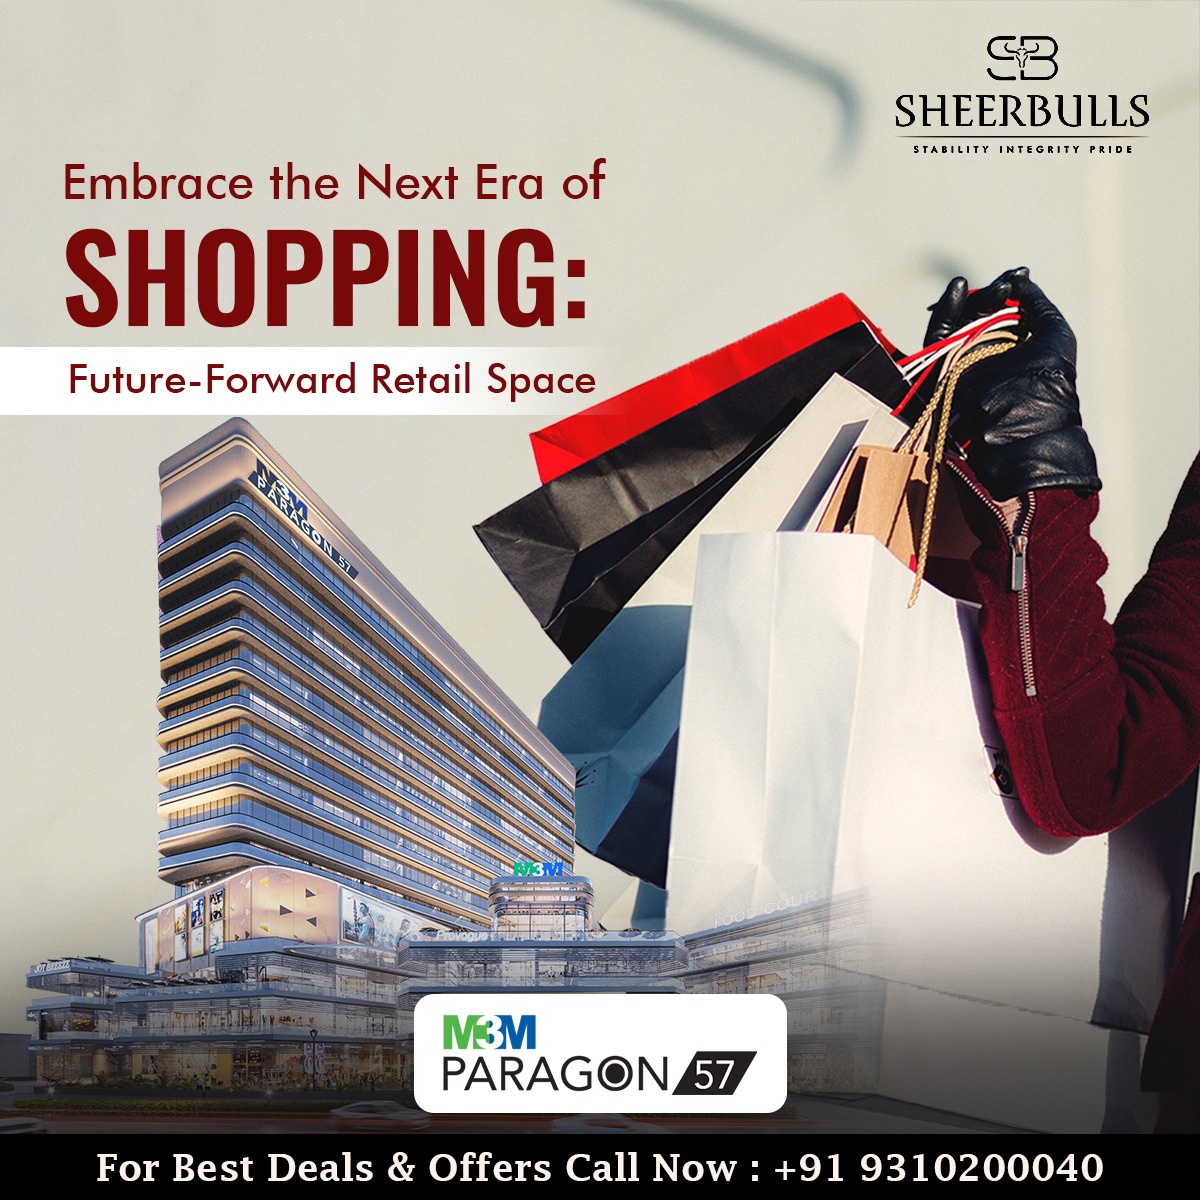 🌟 Invest in the future of retail with M3M Paragon! Prime location, endless opportunities! 💼💰 
#sheerbullsindia #M3MParagon57 #commercialinvestment #FutureReady